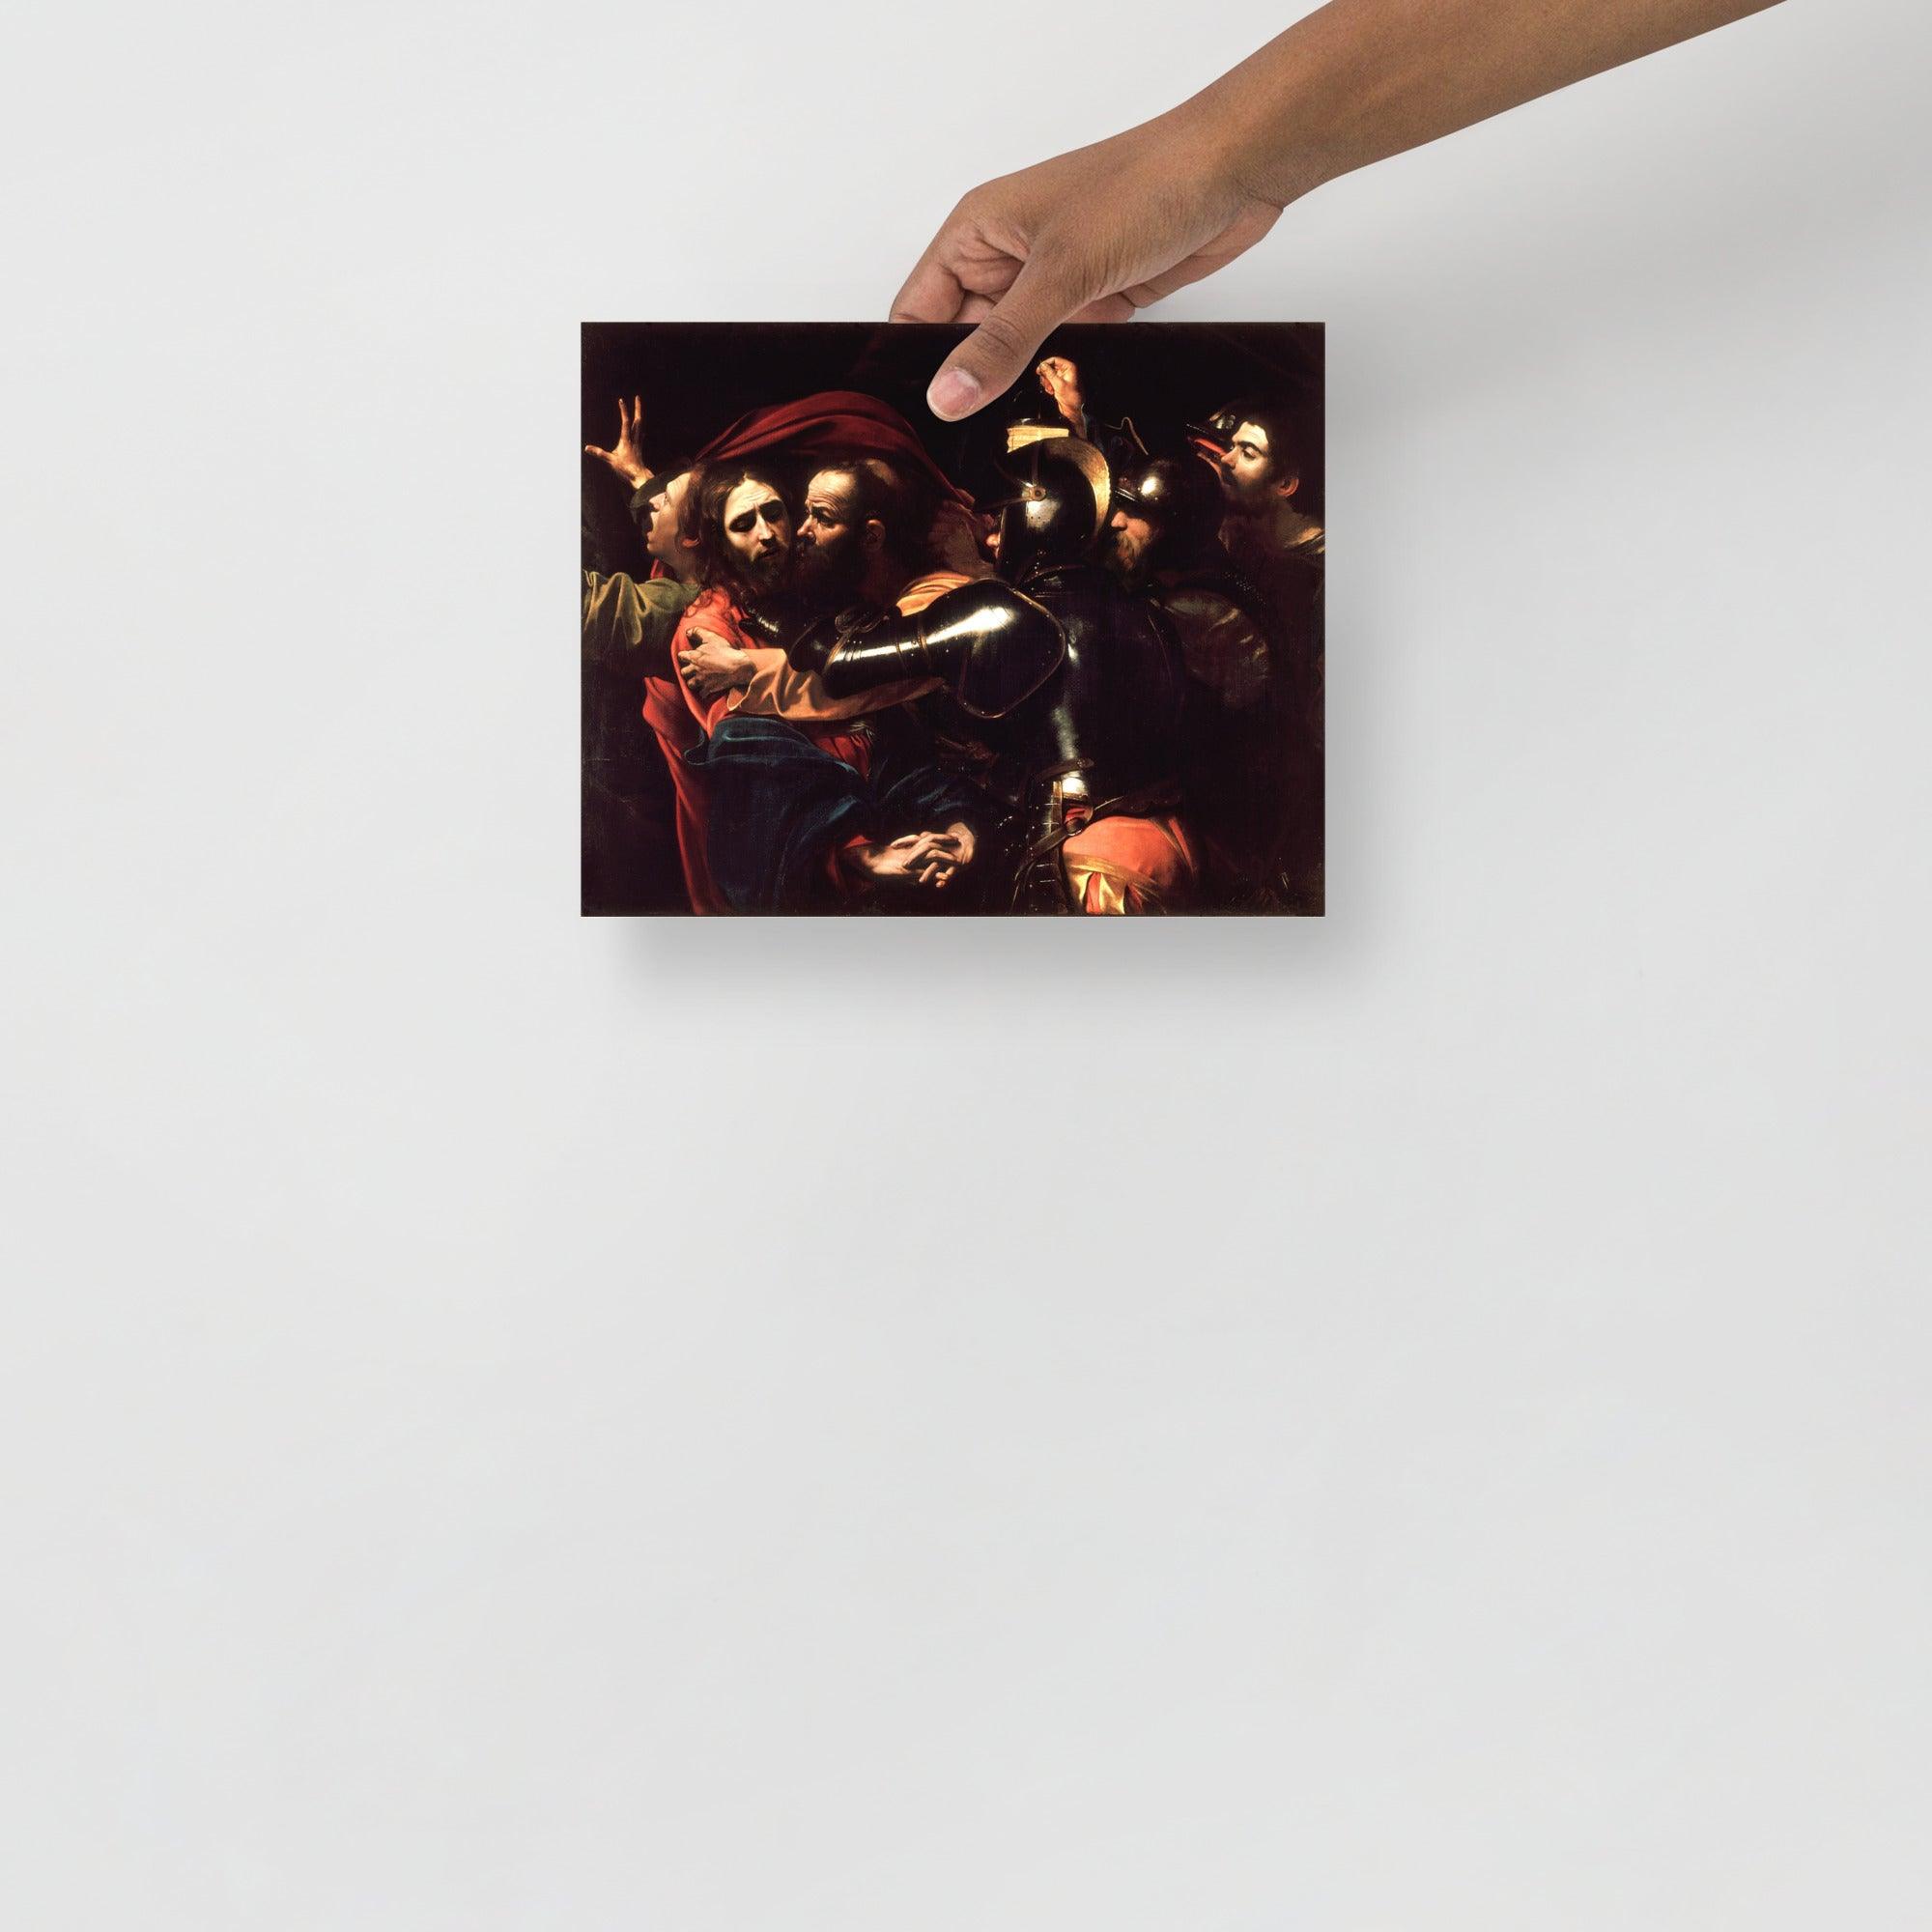 The Taking of Christ by Caravaggio poster on a plain backdrop in size 8x10”.